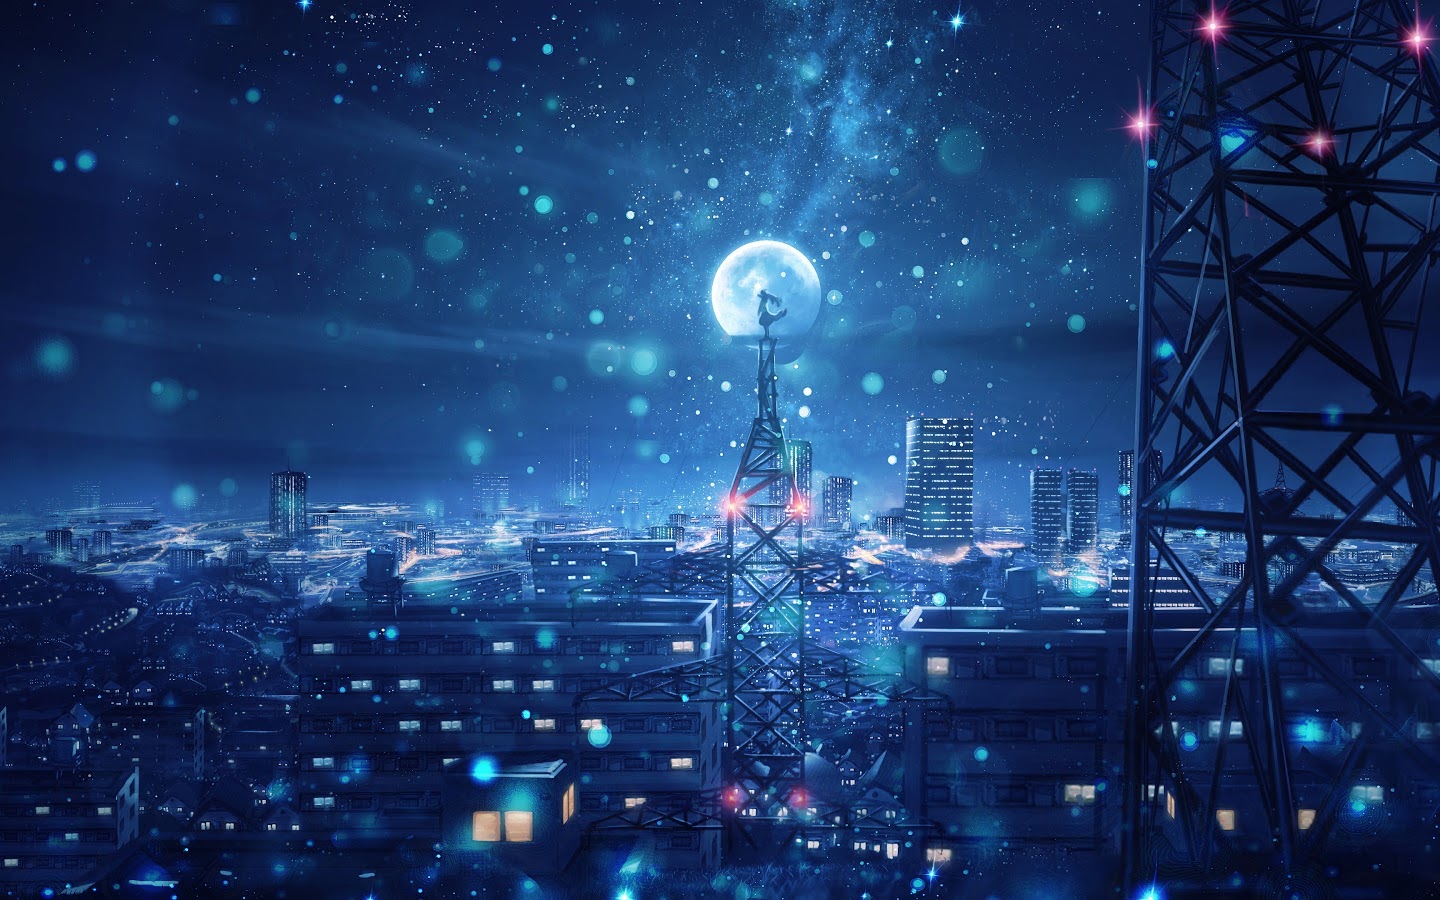 Download wallpaper Sky Anime Night Scenery section art in resolution  1440x900